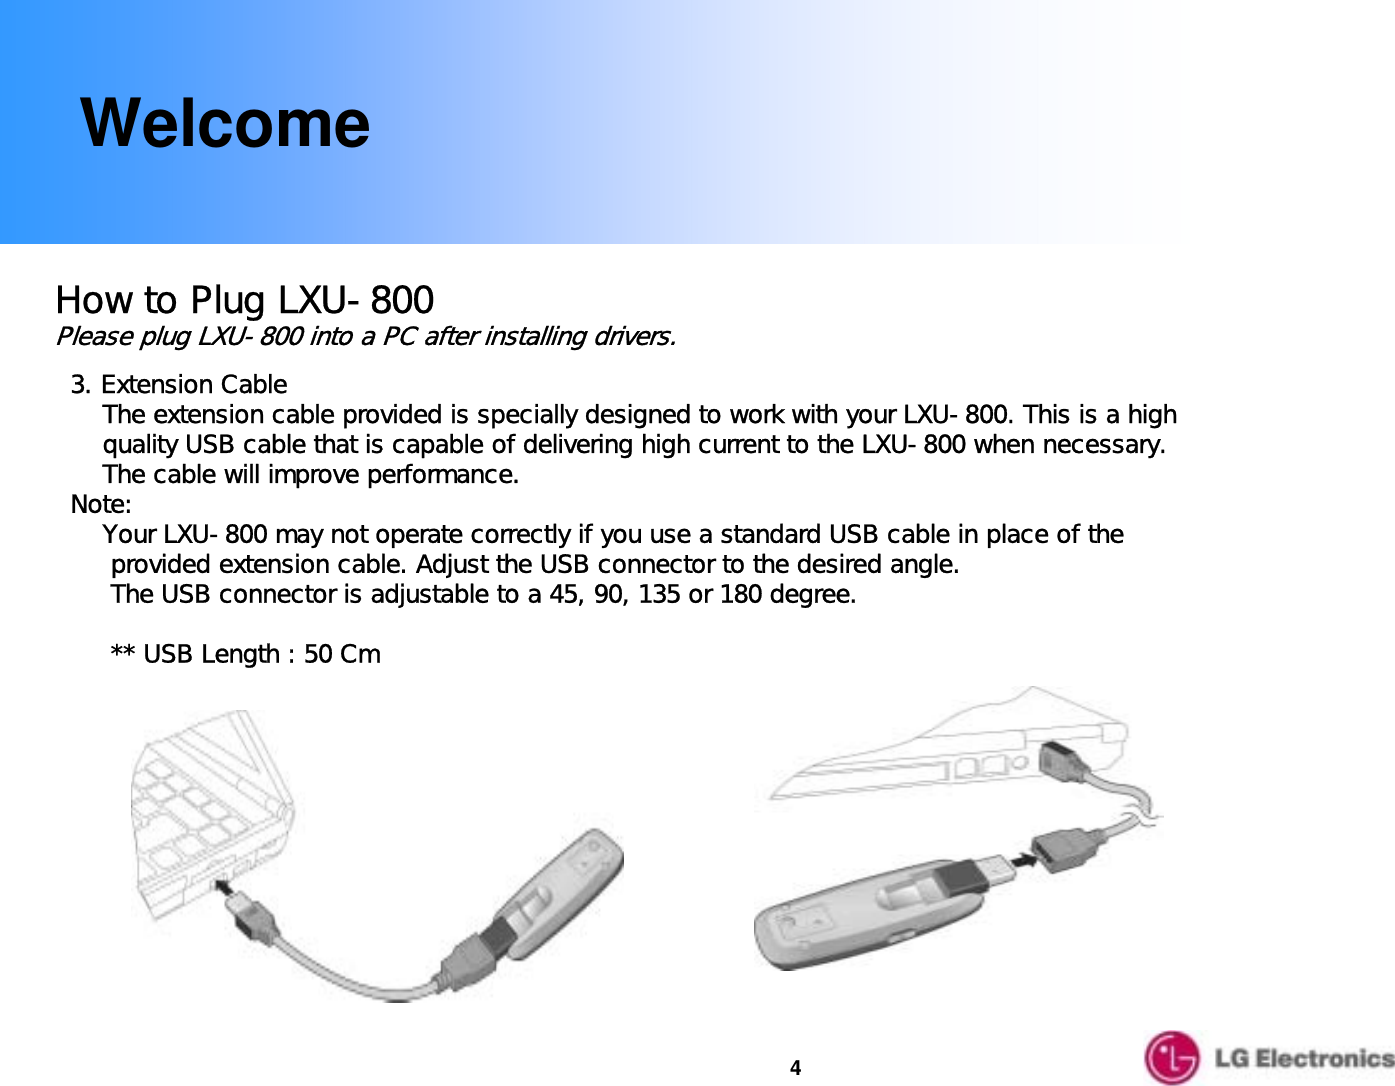 4WelcomeHow to Plug LXU-800Please plug LXU-800 into a PC after installing drivers.3. Extension CableThe extension cable provided is specially designed to work with your LXU-800. This is a high   quality USB cable that is capable of delivering high current to the LXU-800 when necessary. The cable will improve performance.Note:Your LXU-800 may not operate correctly if you use a standard USB cable in place of theprovided extension cable. Adjust the USB connector to the desired angle. The USB connector is adjustable to a 45, 90, 135 or 180 degree.      ** USB Length : 50 Cm 